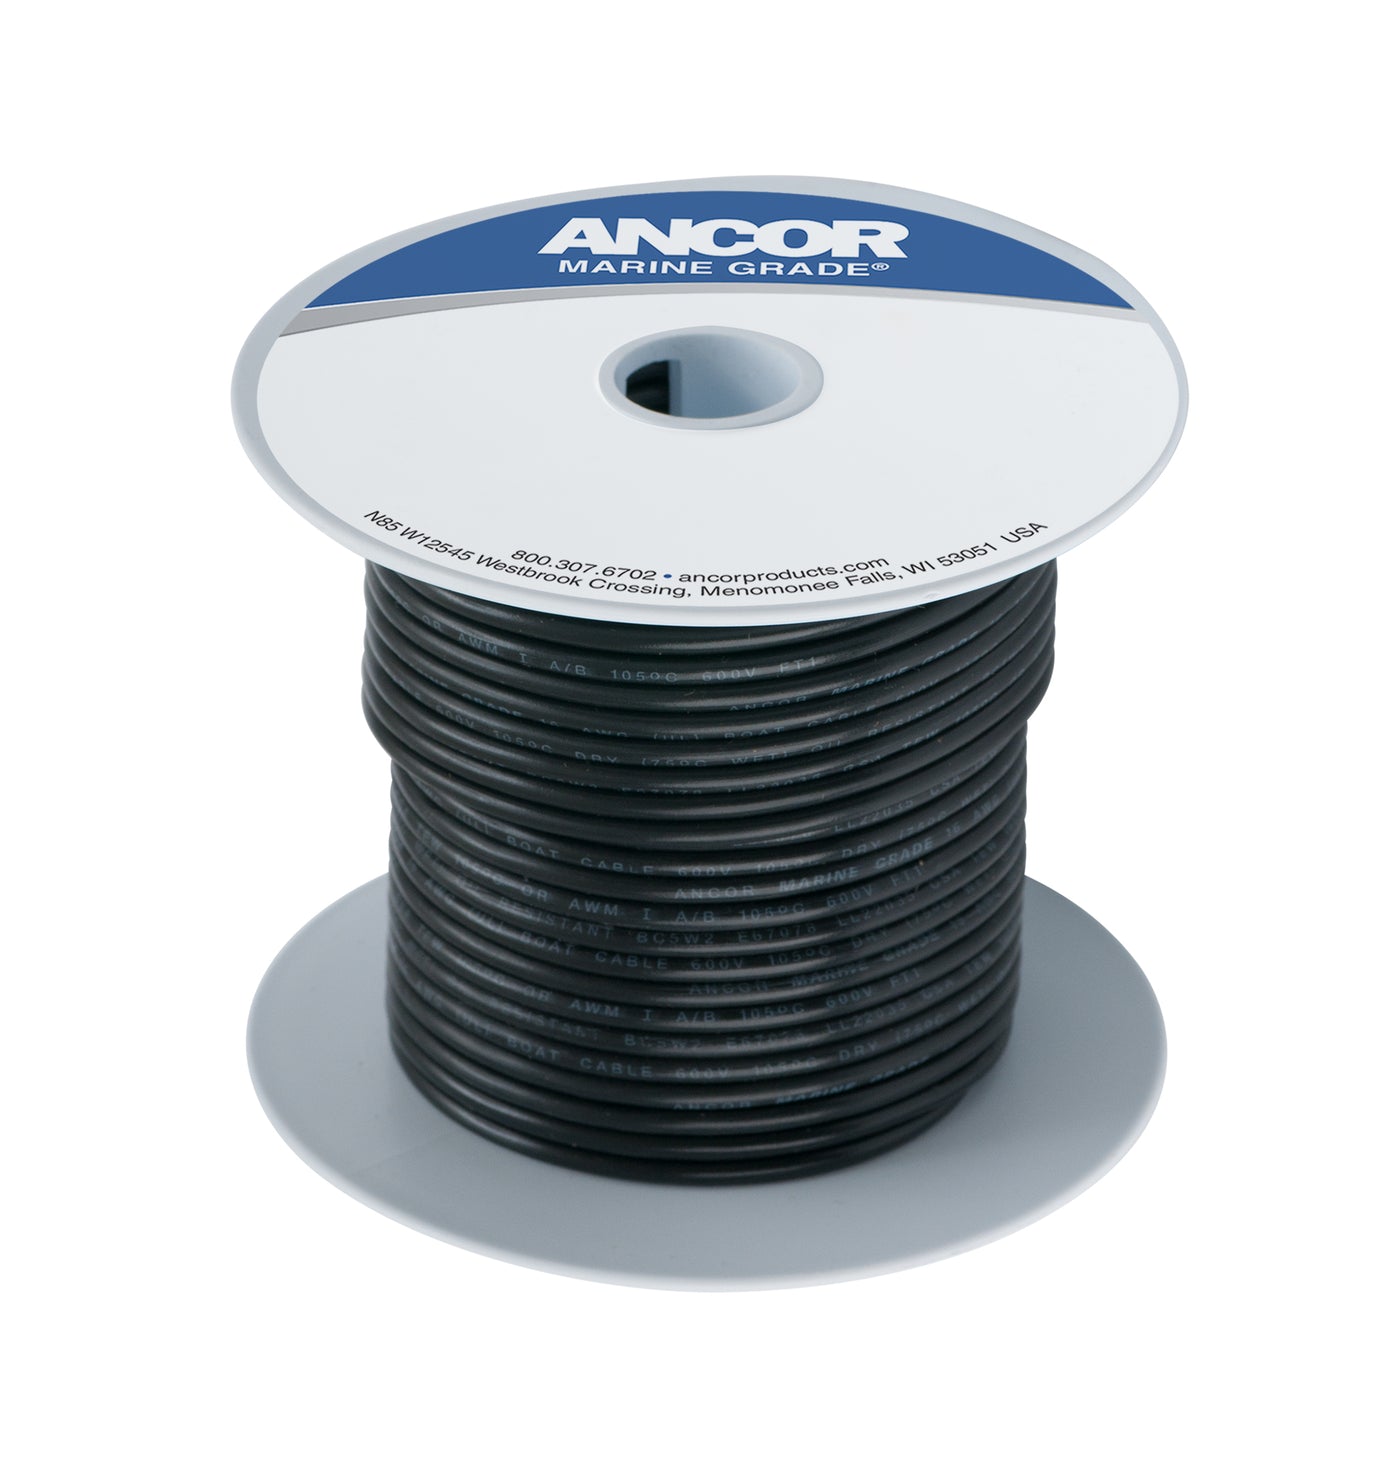 Ancor 108002 Tinned Copper Wire, 10 AWG (5mm²), Black - 25ft